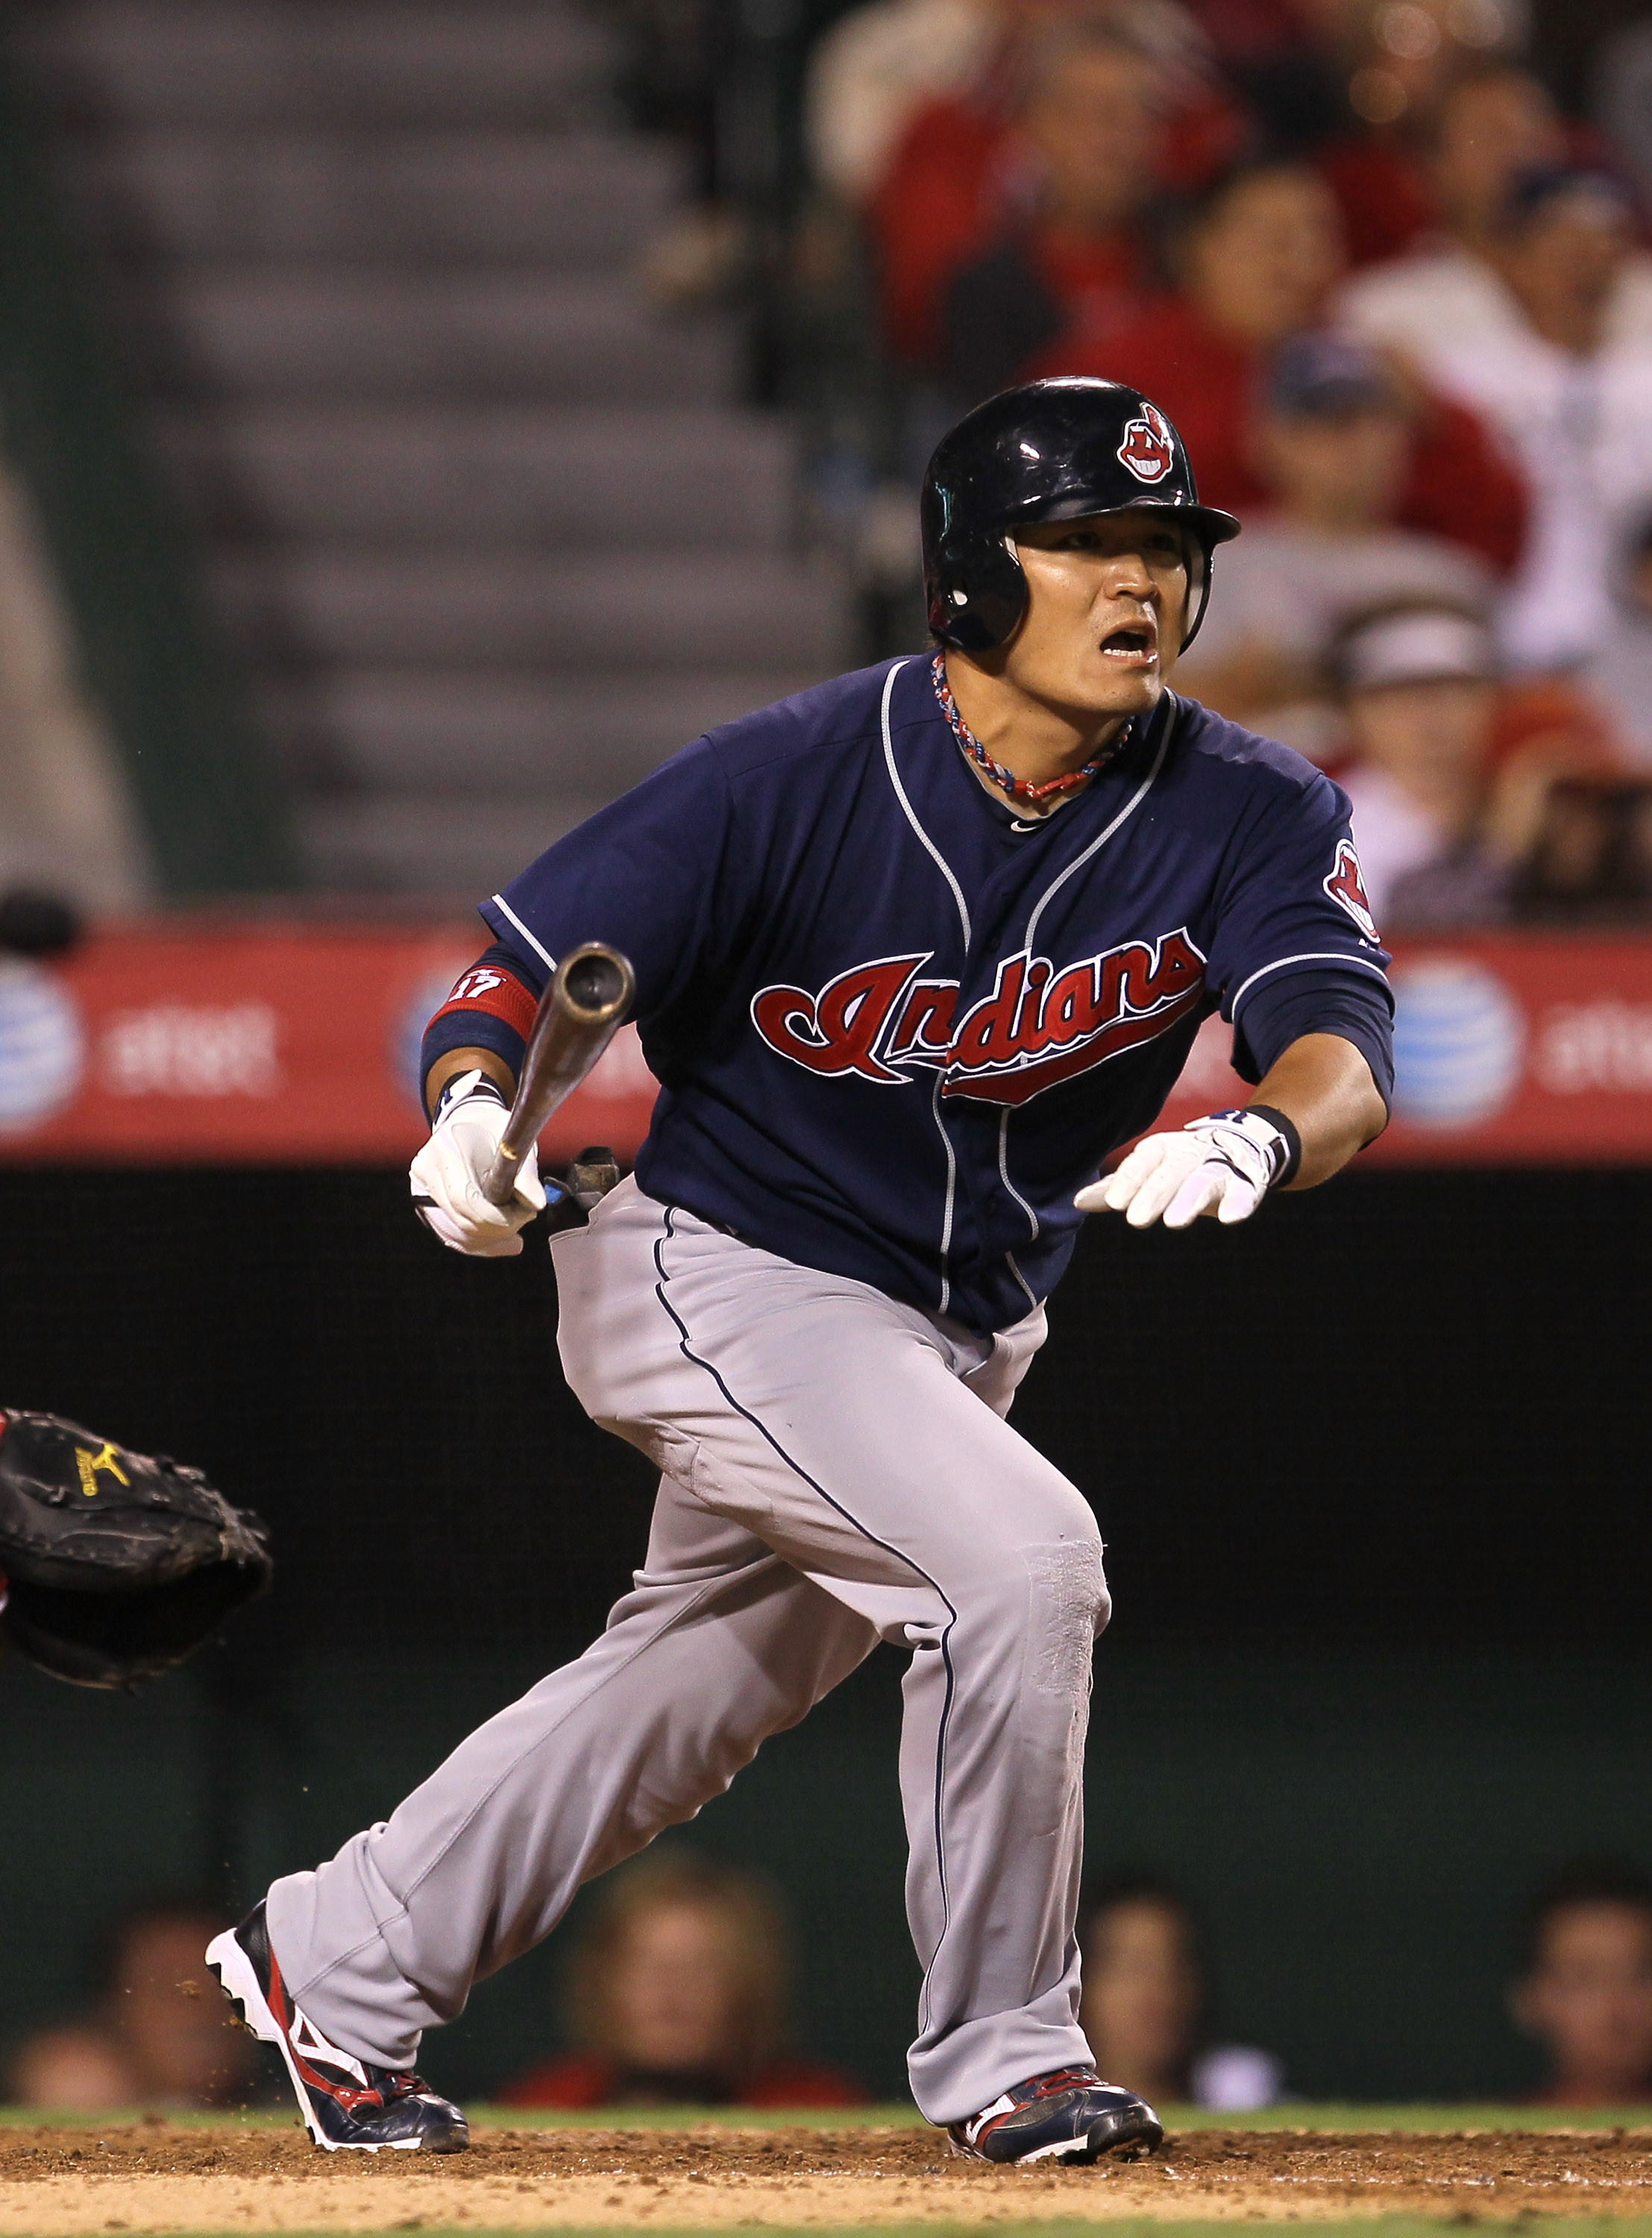 ANAHEIM, CA - SEPTEMBER 06:  Shin-Soo Choo #17 of the Cleveland Indians bats against the Los Angeles Angels of Anaheim on September 6, 2010 at Angel Stadium in Anaheim, California. The  Indians won 3-2.  (Photo by Stephen Dunn/Getty Images)